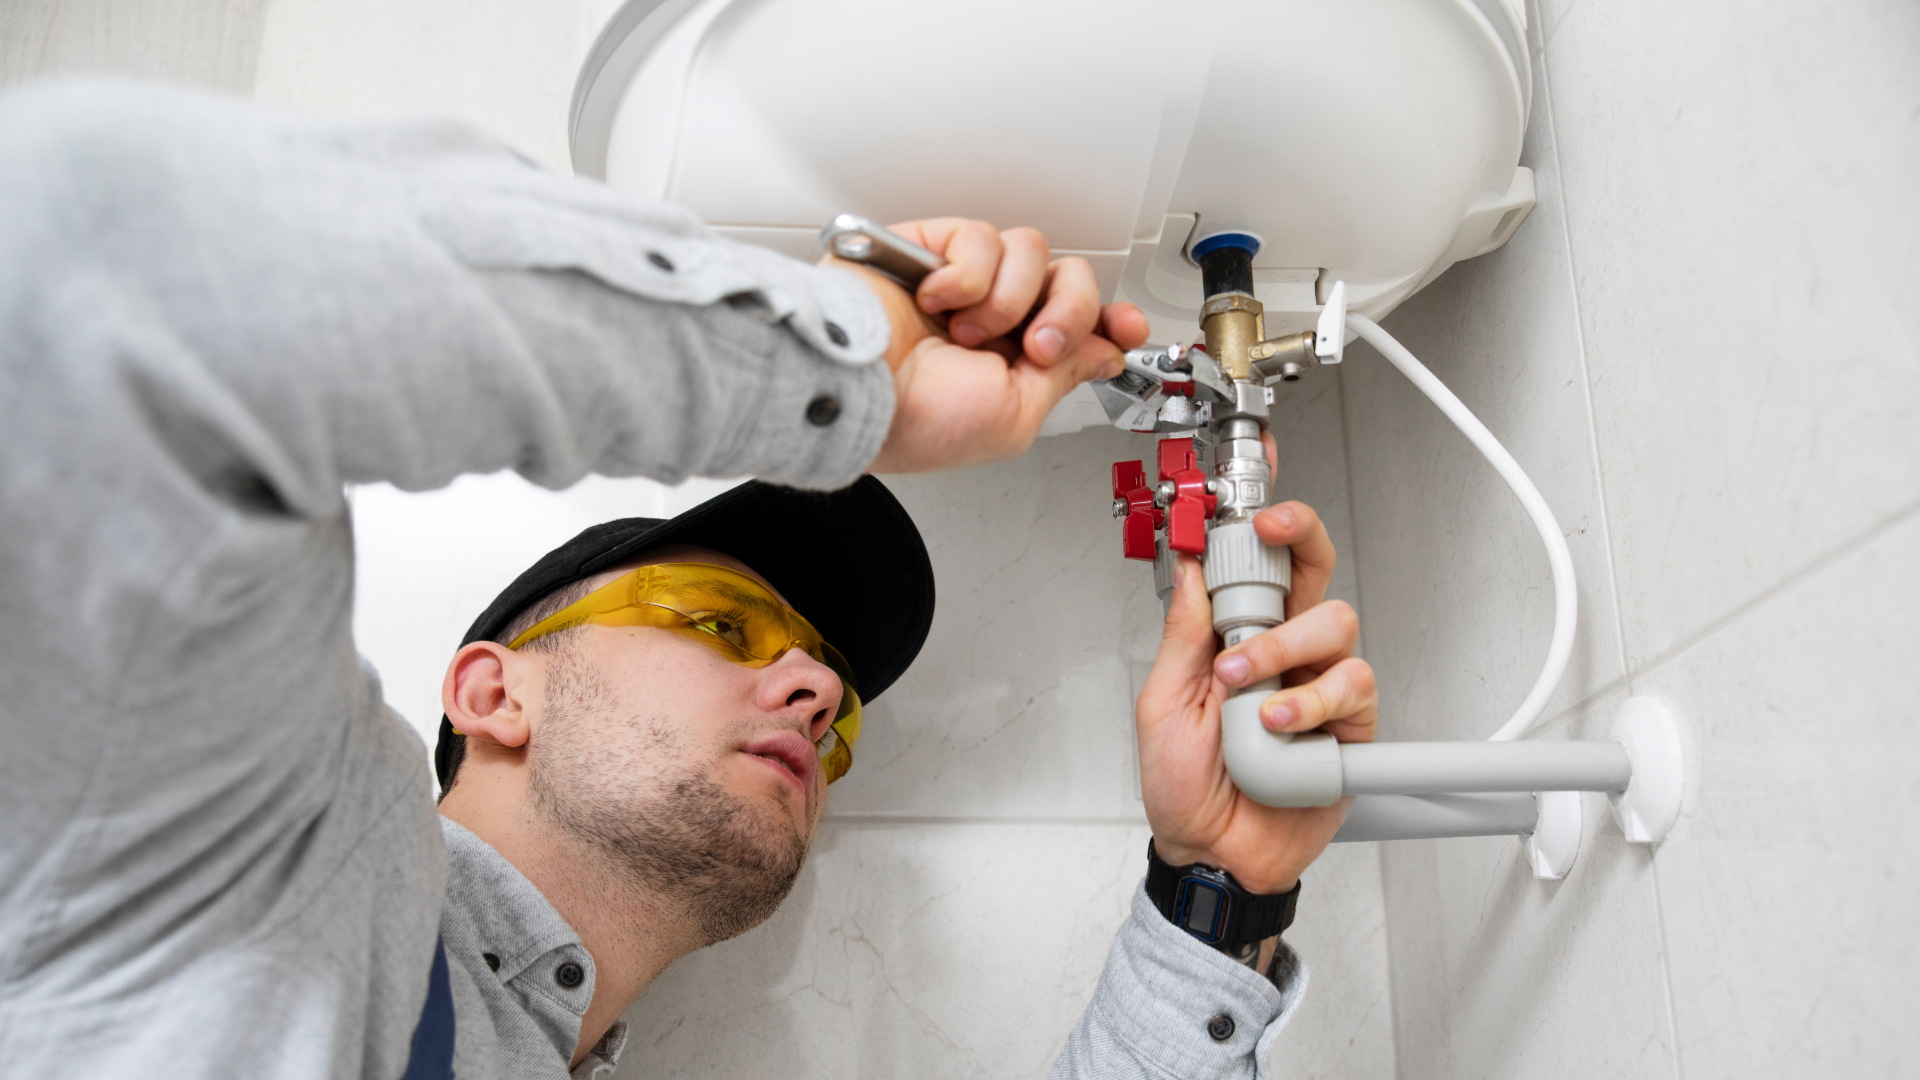  install a new water heater